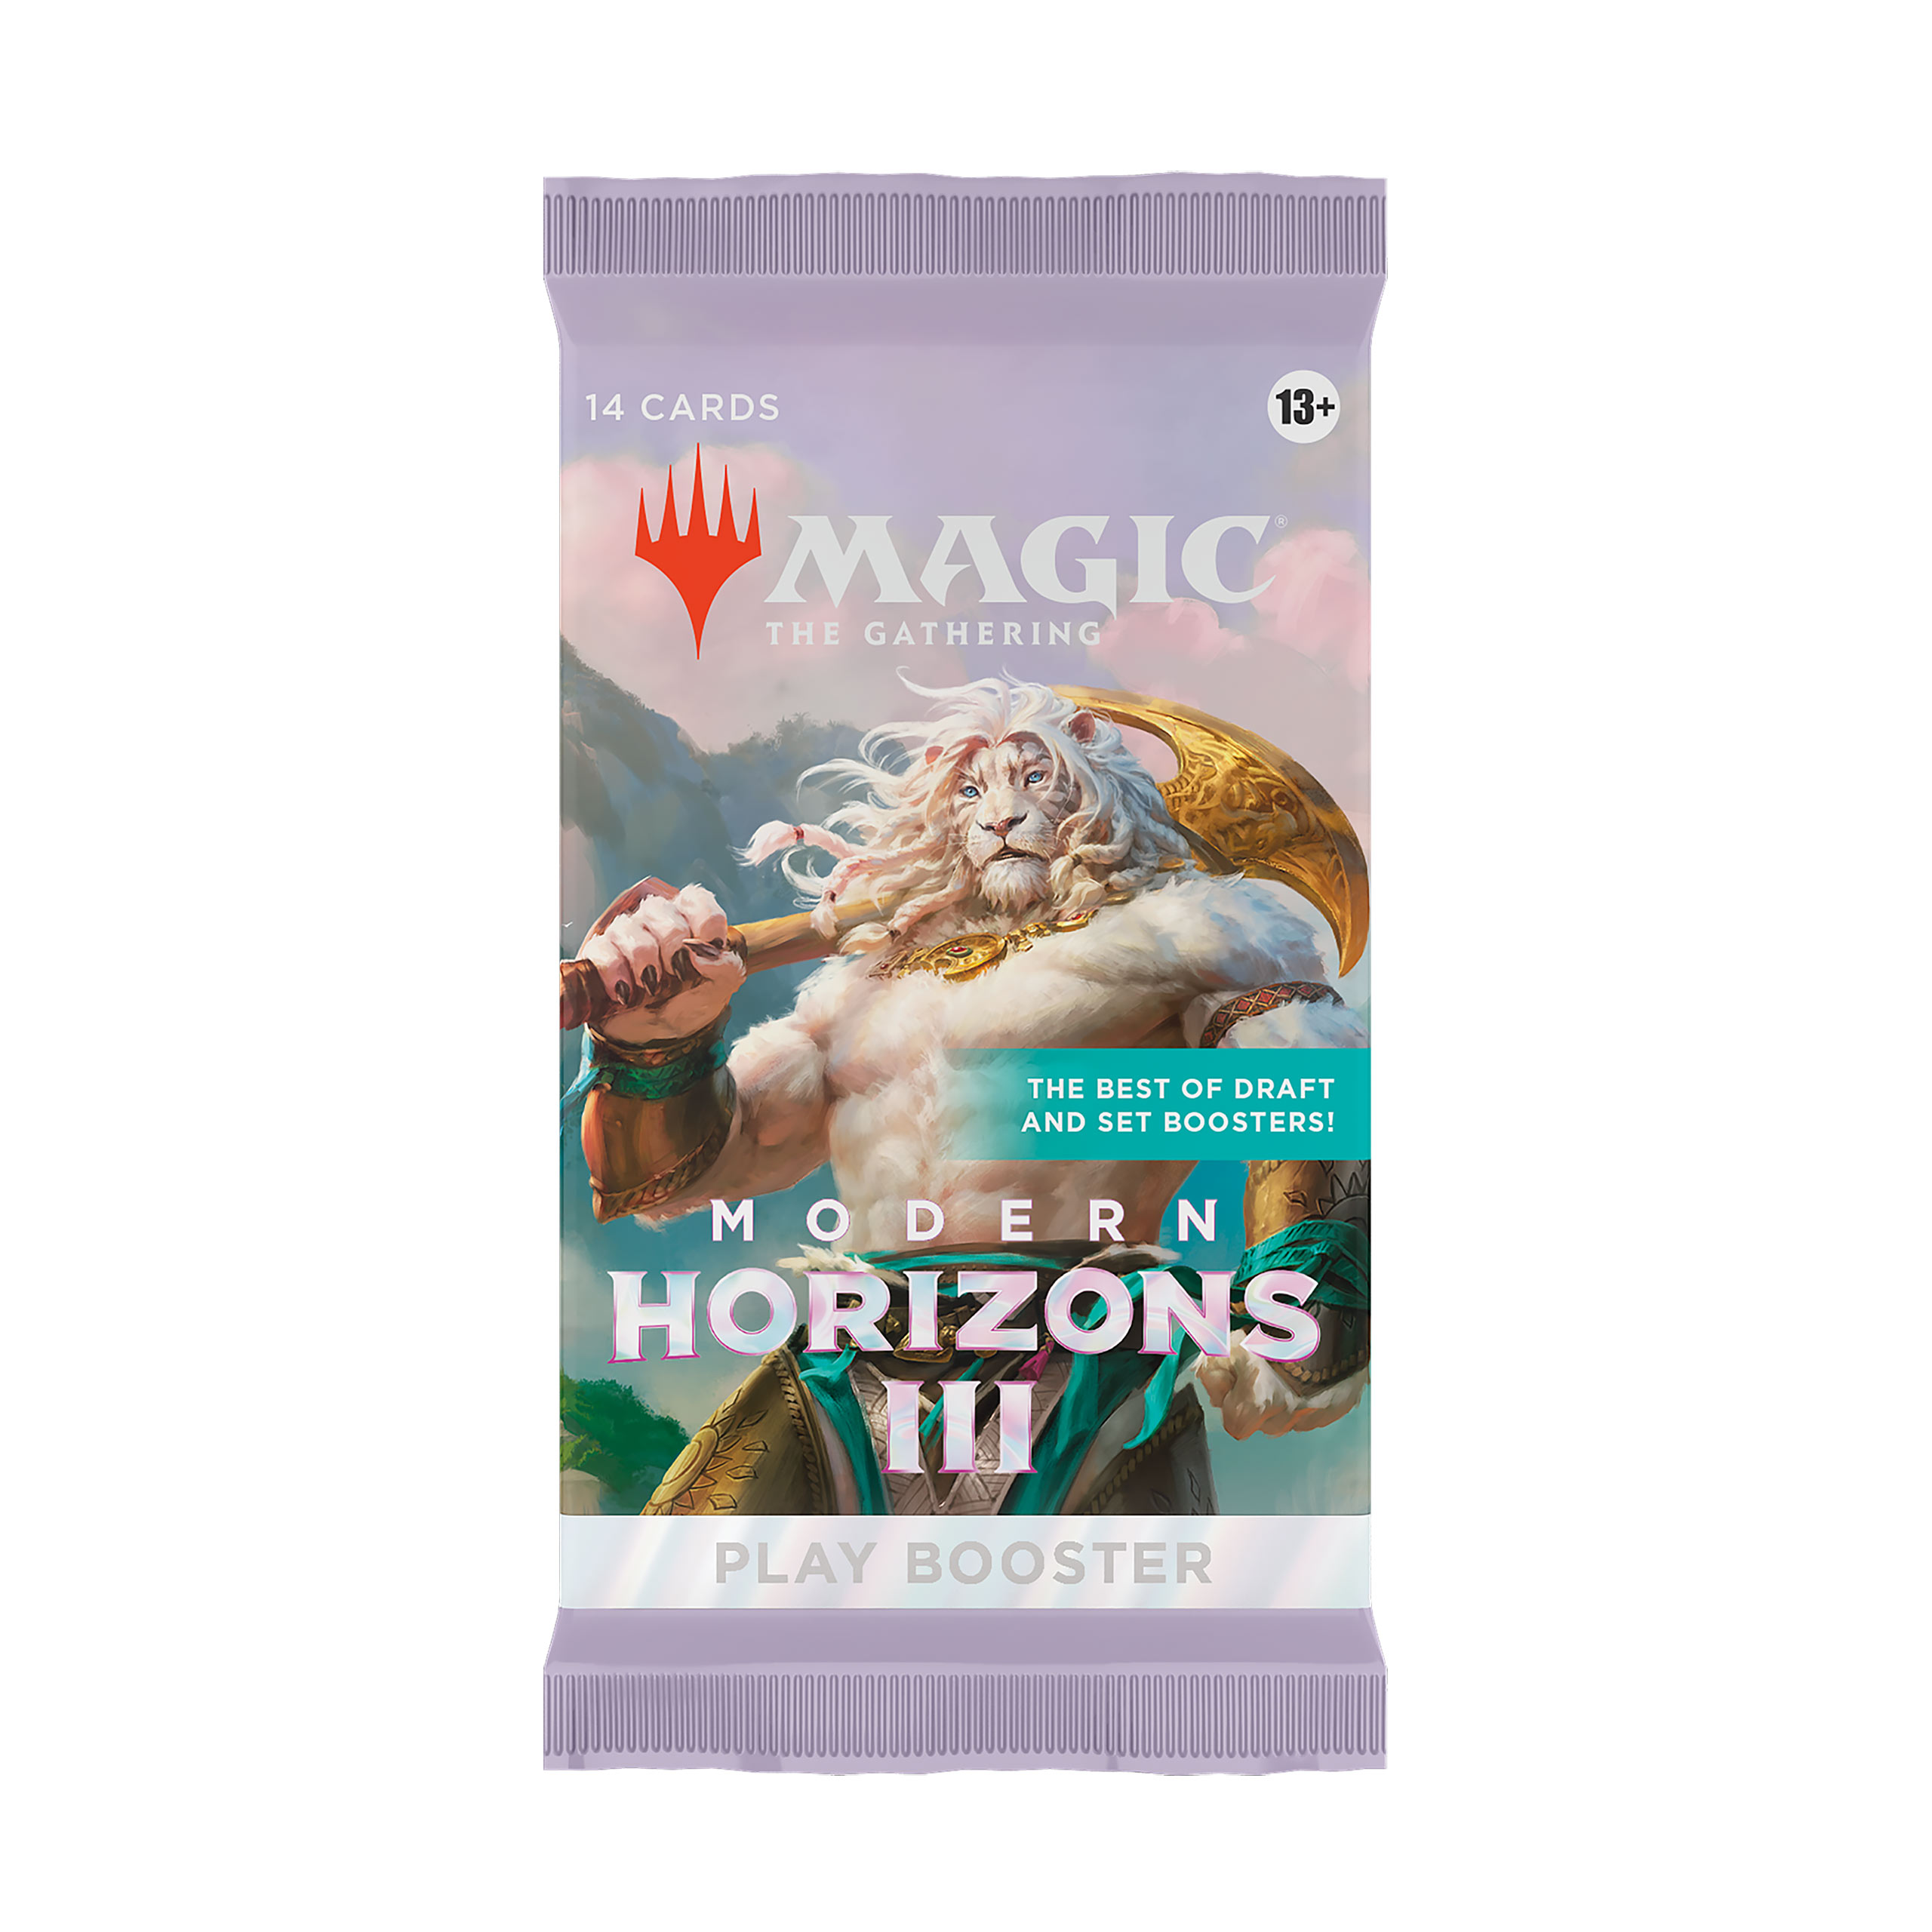 Modern Horizons 3 Play Booster englisch Version - Magic The Gathering